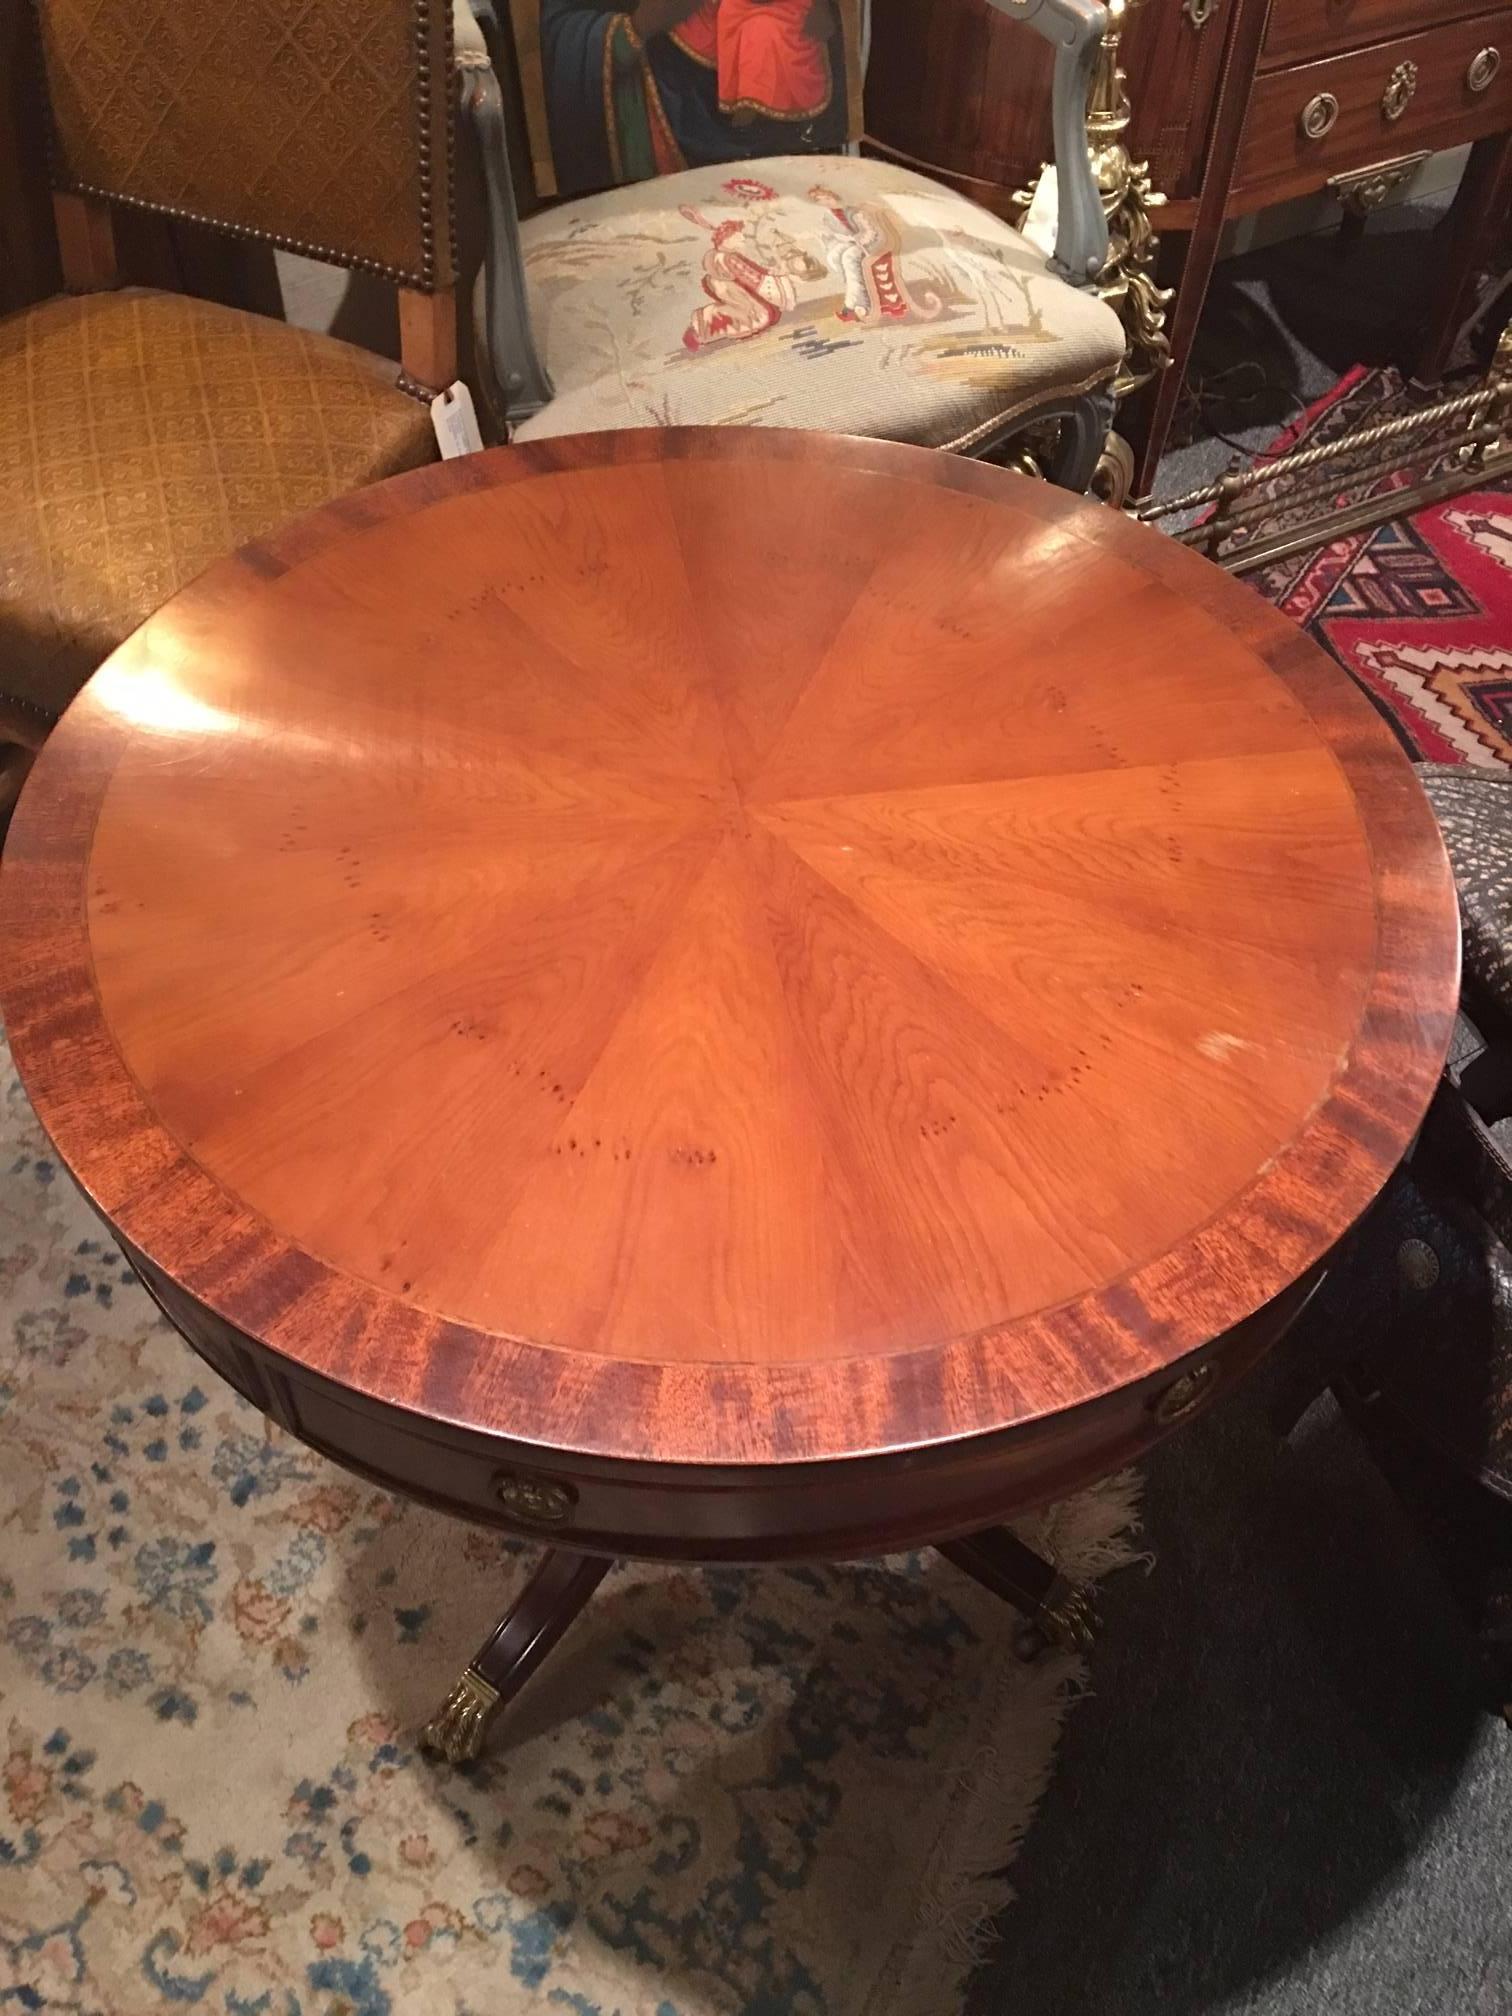 Mahogany round side table with a single drawer on casters, mid-20th century.